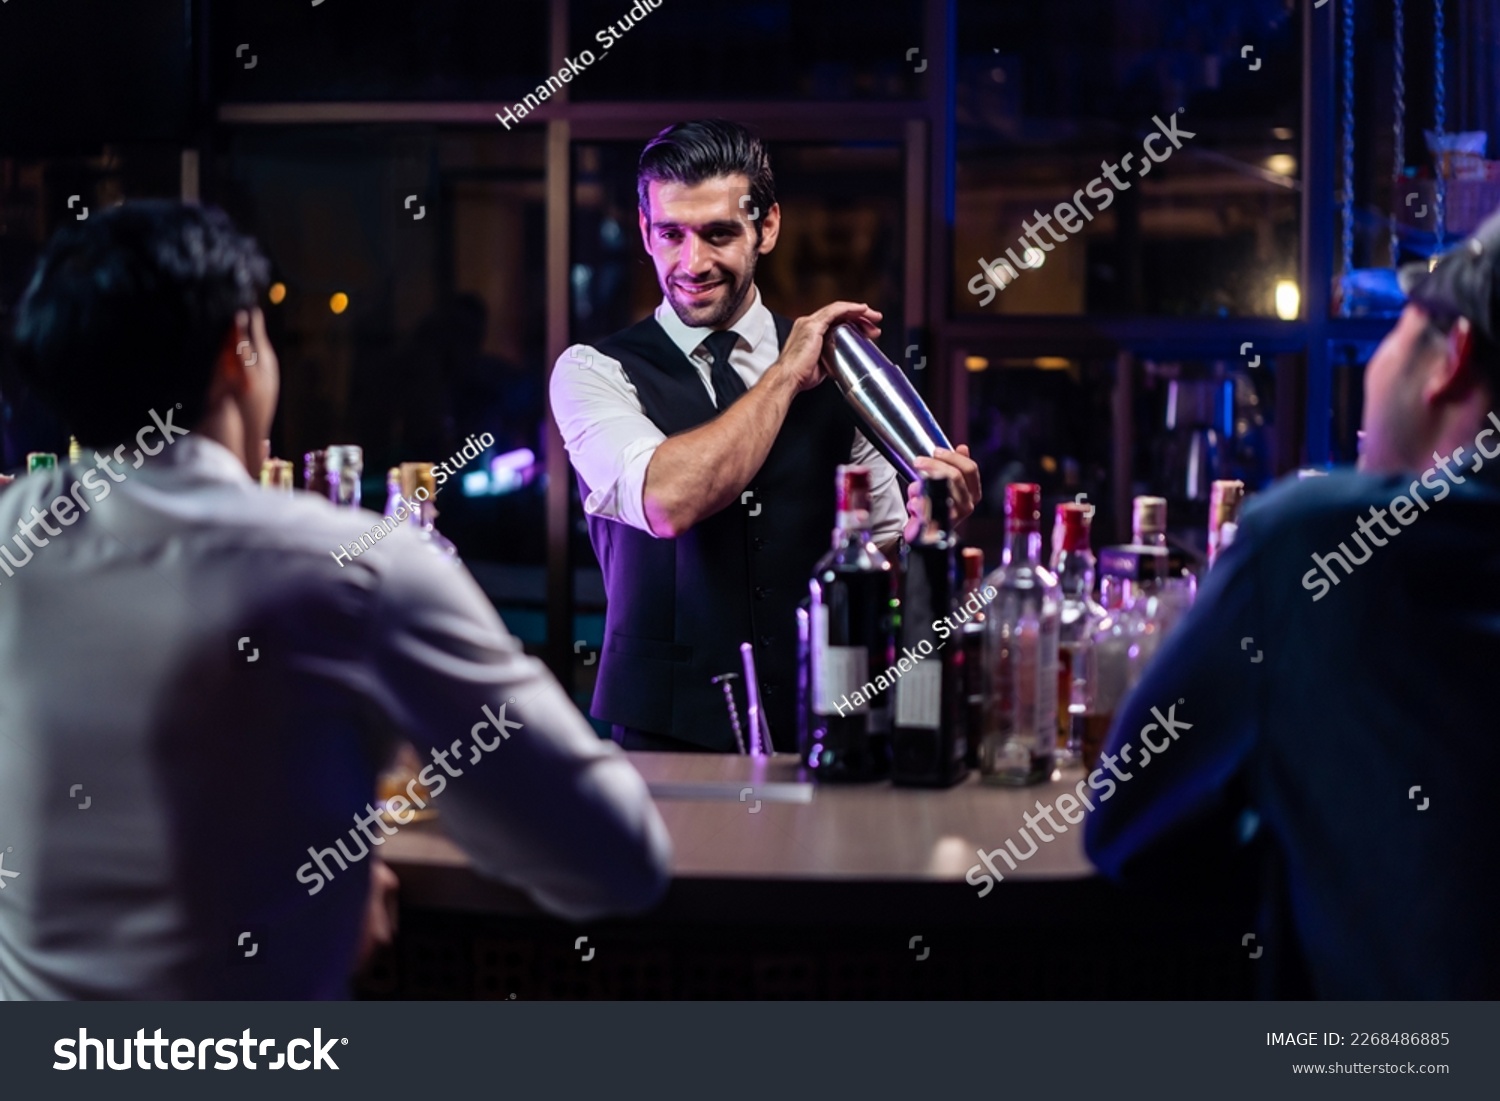 Caucasian profession bartender making a cocktail for women at a bar. Attractive barman pouring mixes liquor ingredients cocktail drink from cocktail shaker into the glass at night club restaurant. #2268486885